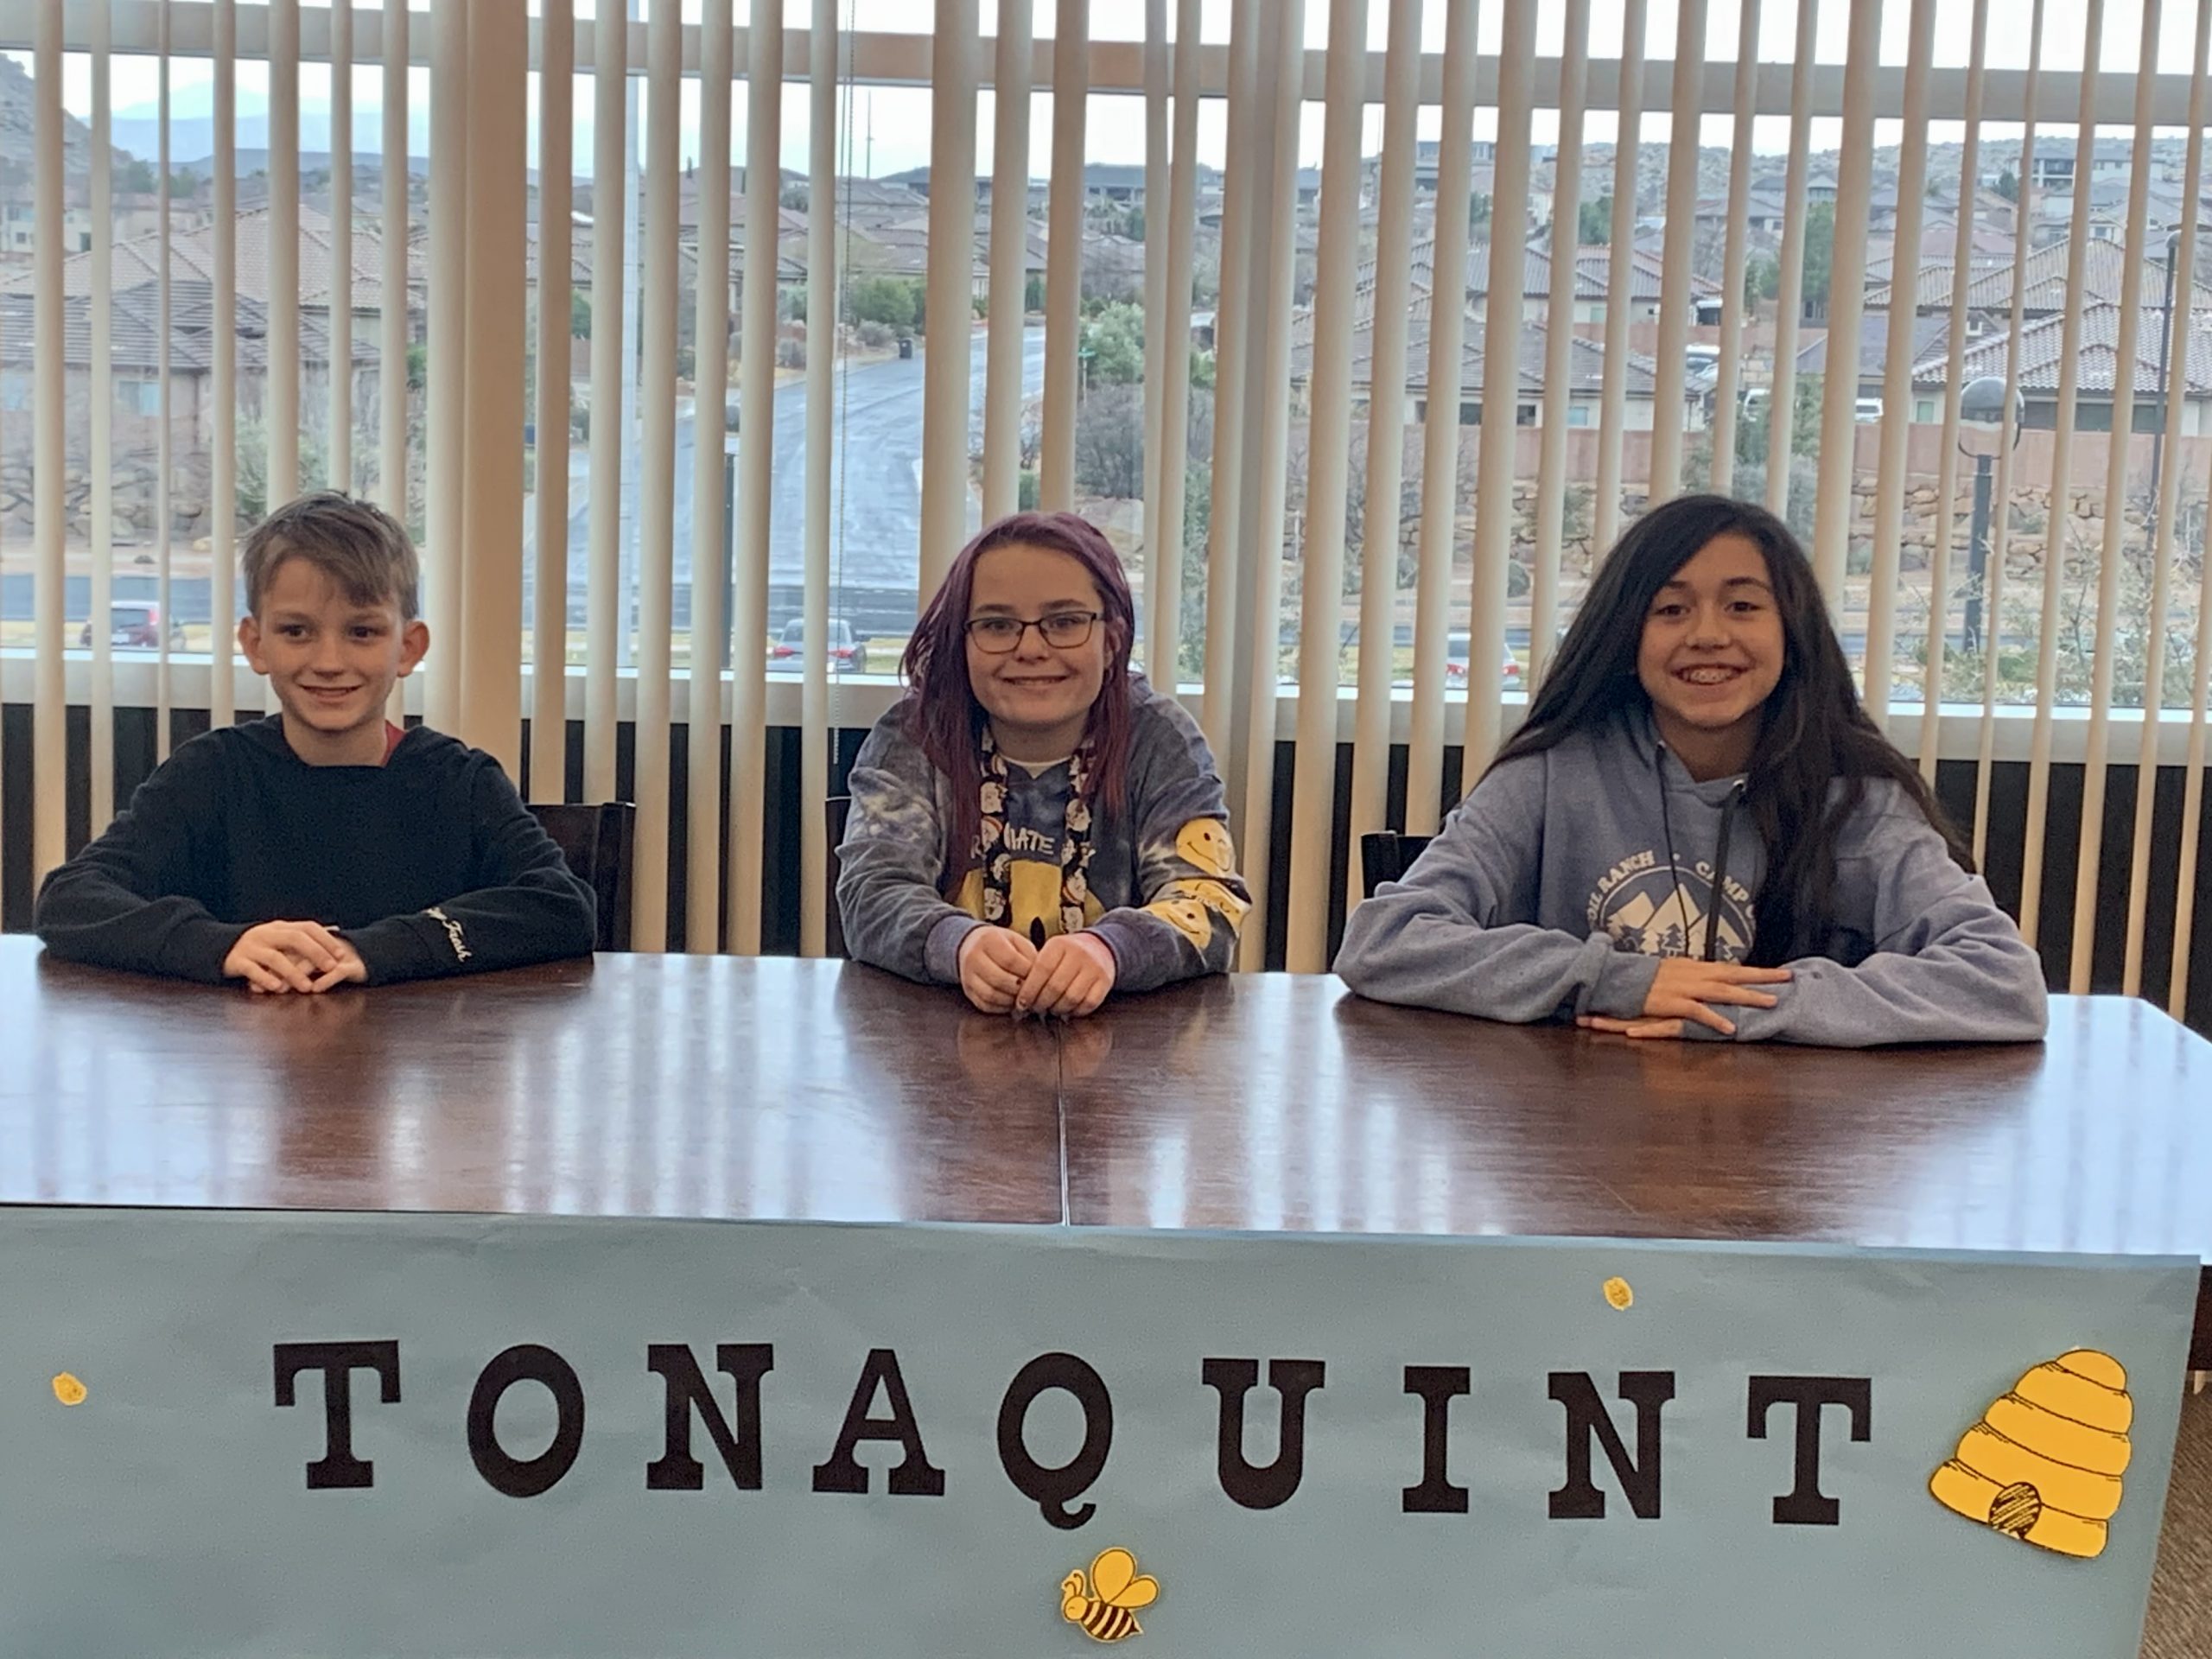 Top three spellers of the Tonaquint Spelling Bee sitting at a table behind the spelling bee sign.